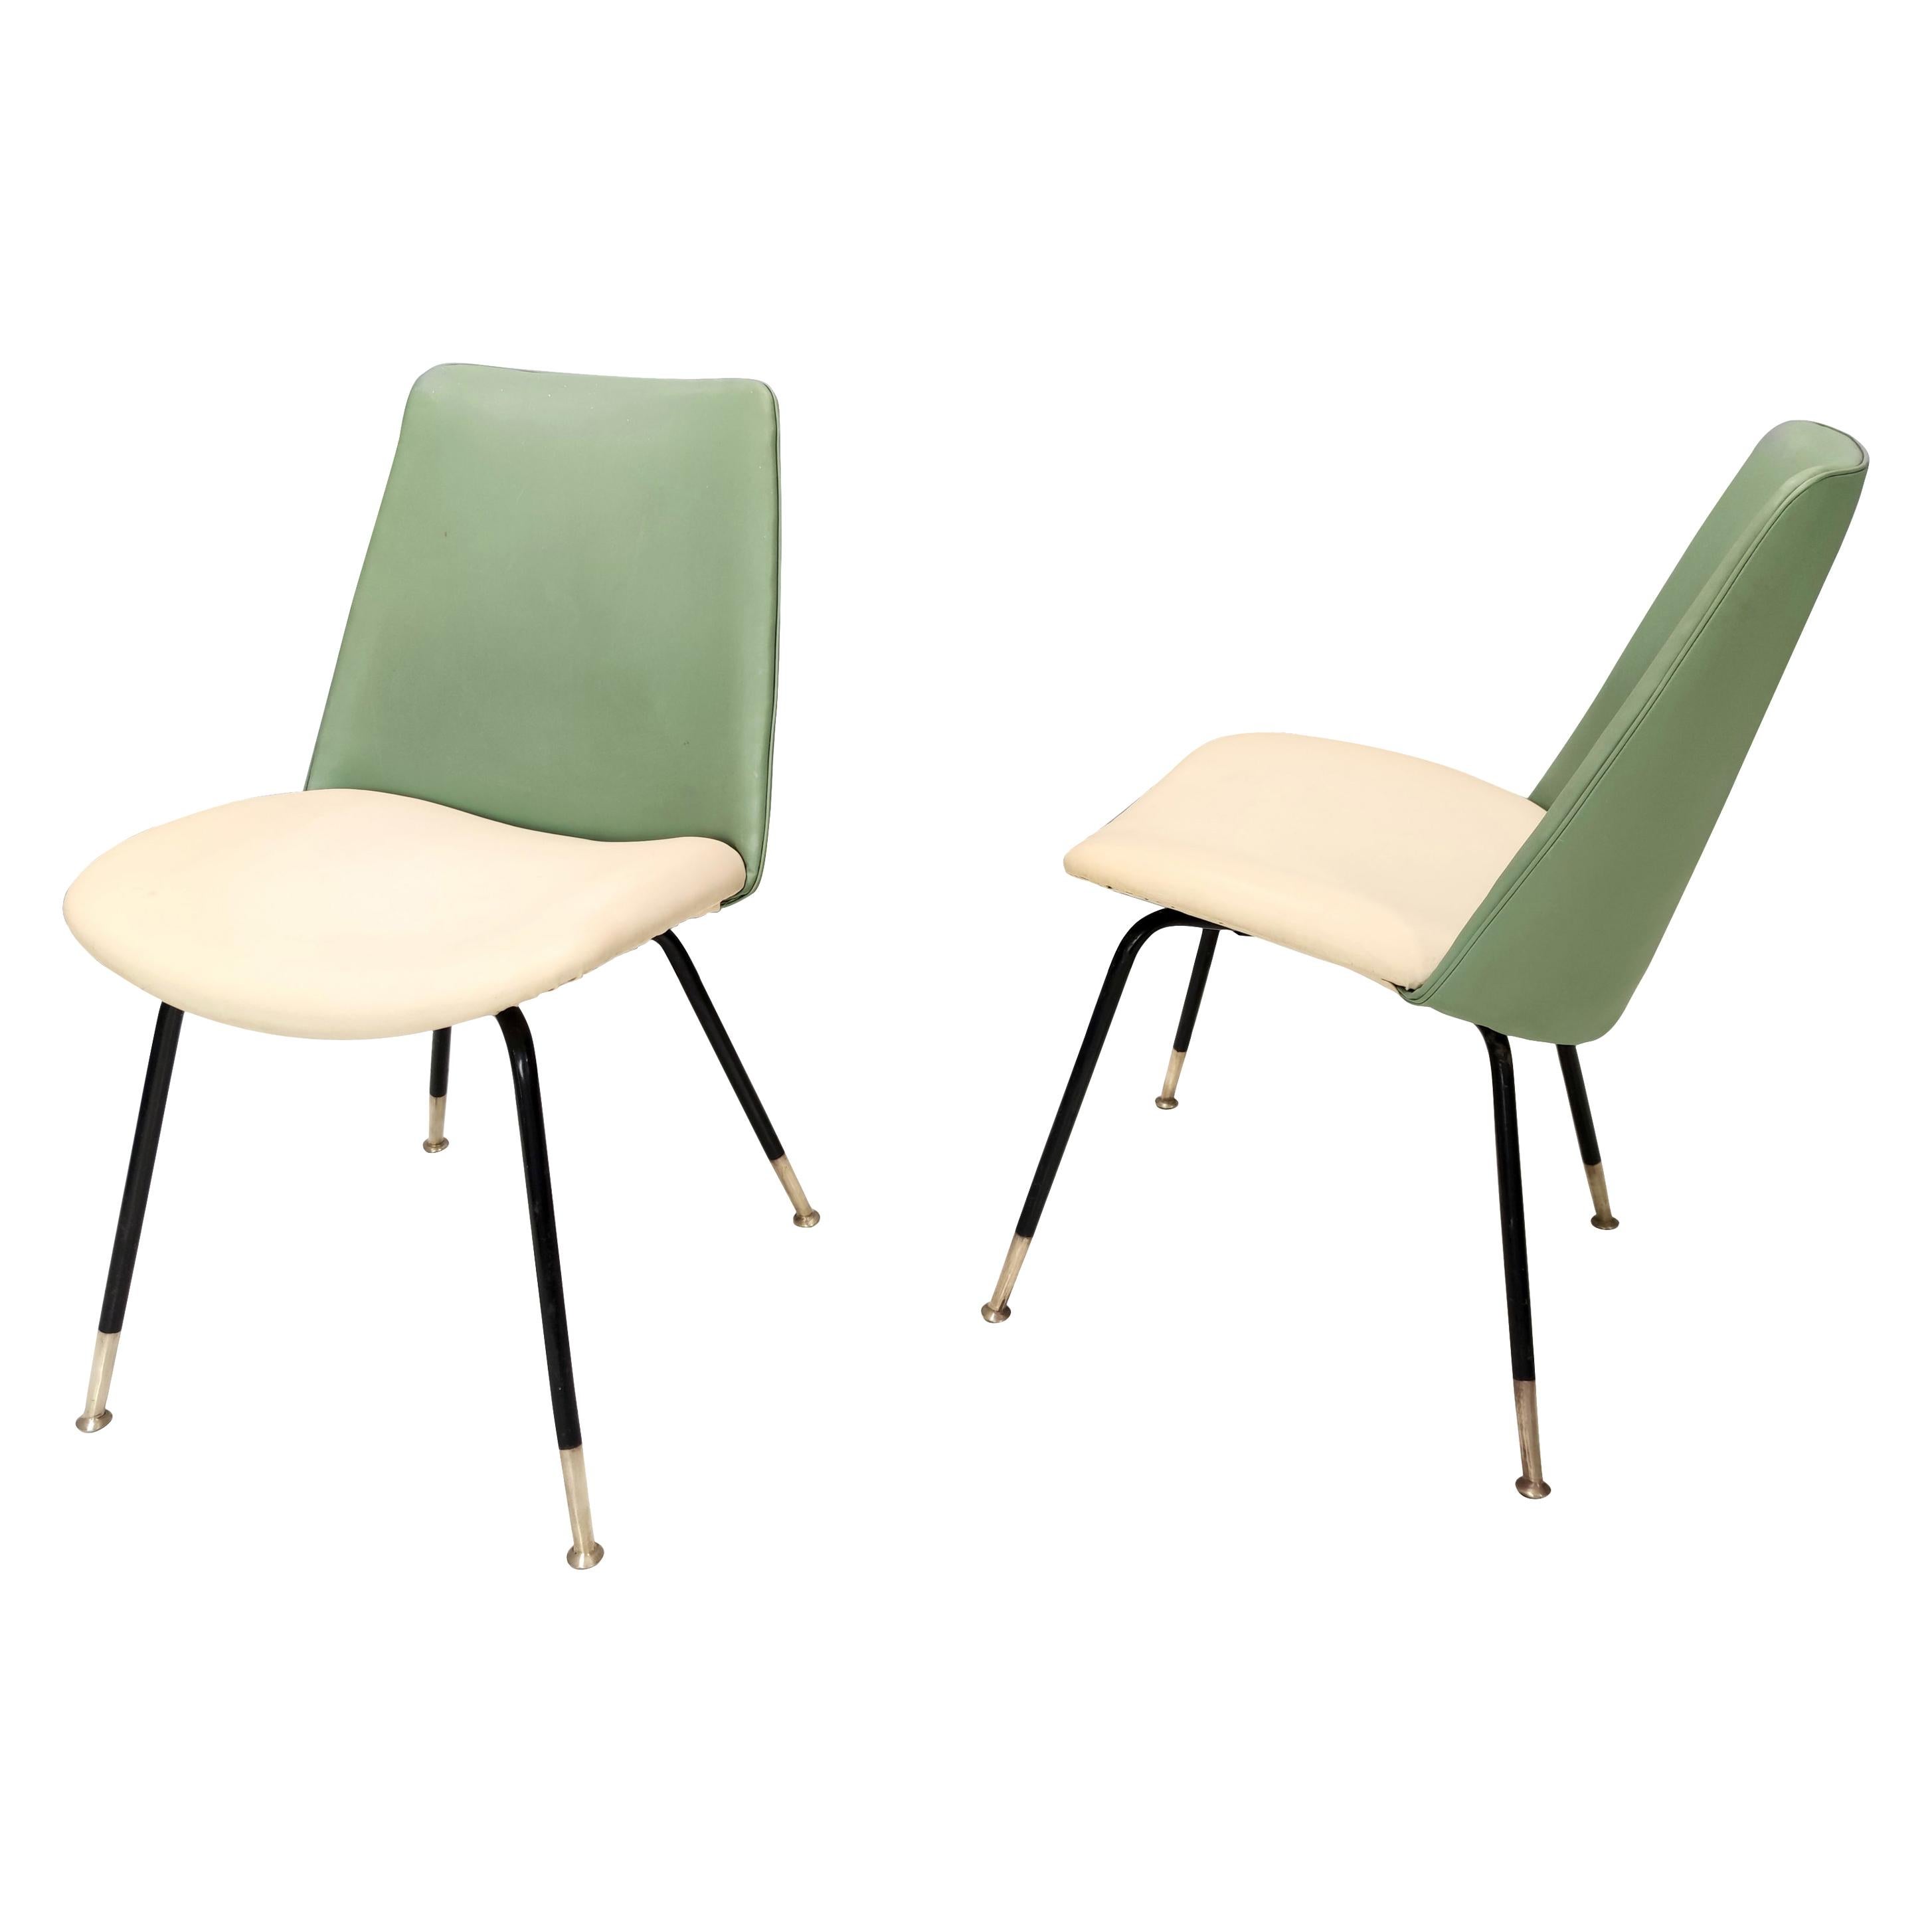 Pair of Green and Ivory Side Chairs by Gastone Rinaldi for Rima, Italy